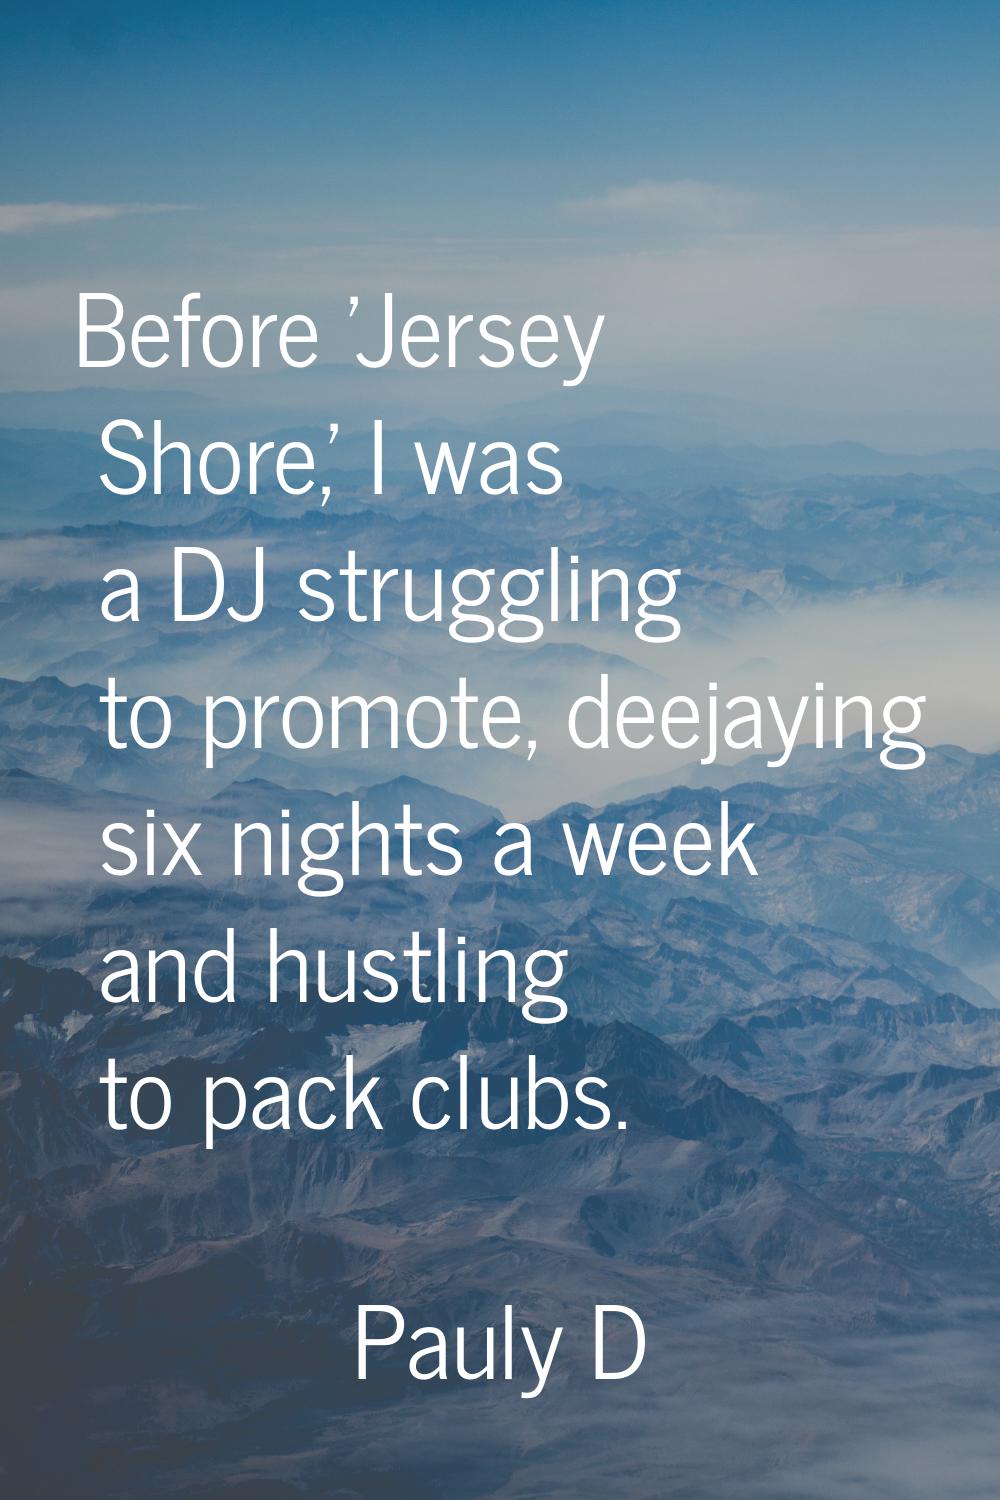 Before 'Jersey Shore,' I was a DJ struggling to promote, deejaying six nights a week and hustling t